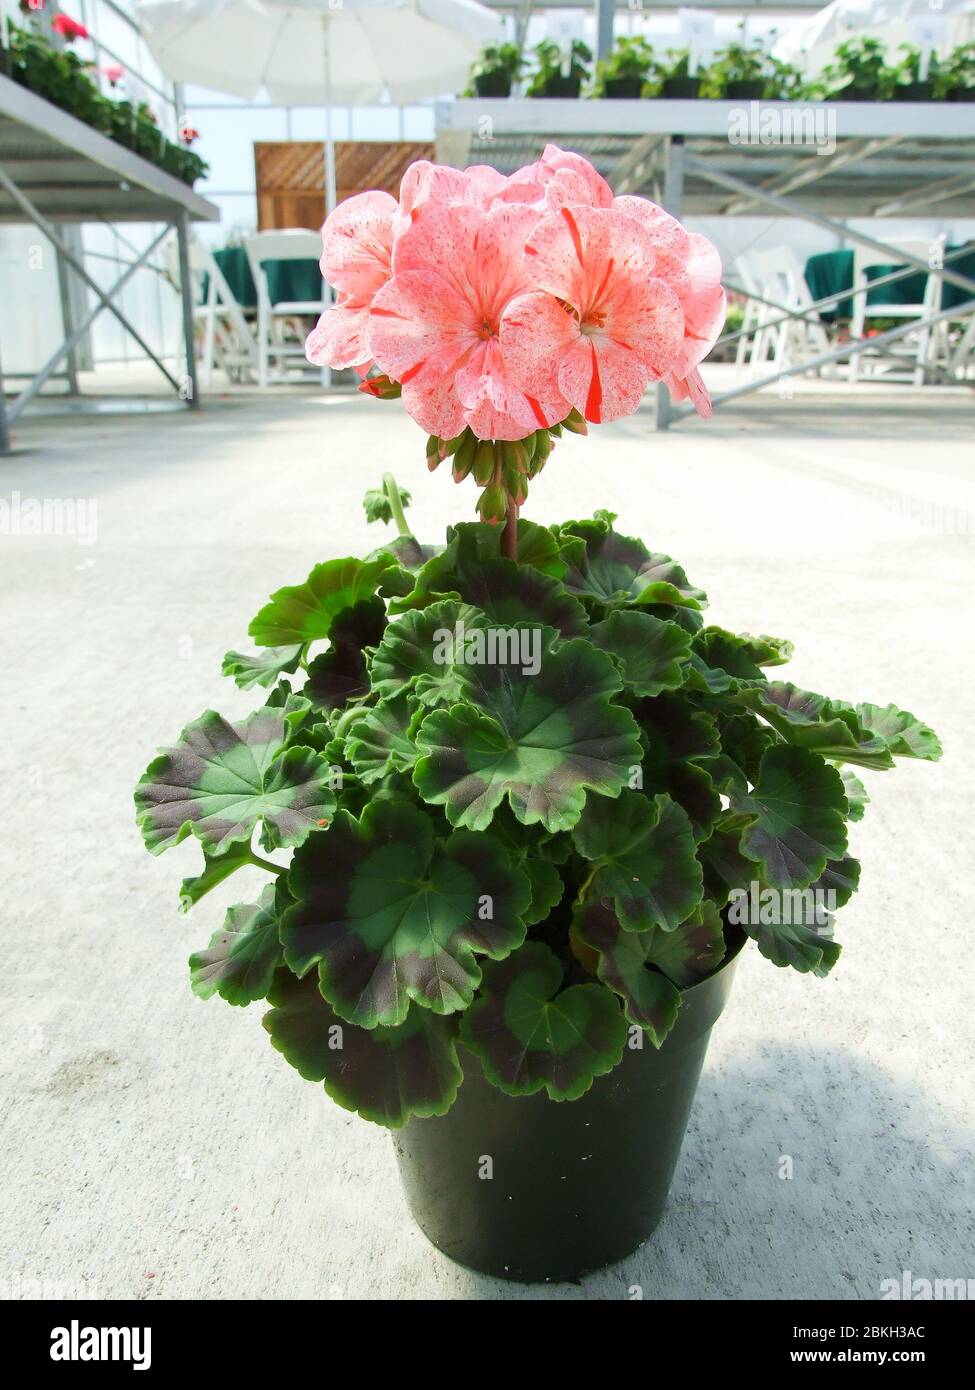 Pelargonium - Geranium Flowers showing their lovely petal Detail in the garden, potted plant Stock Photo